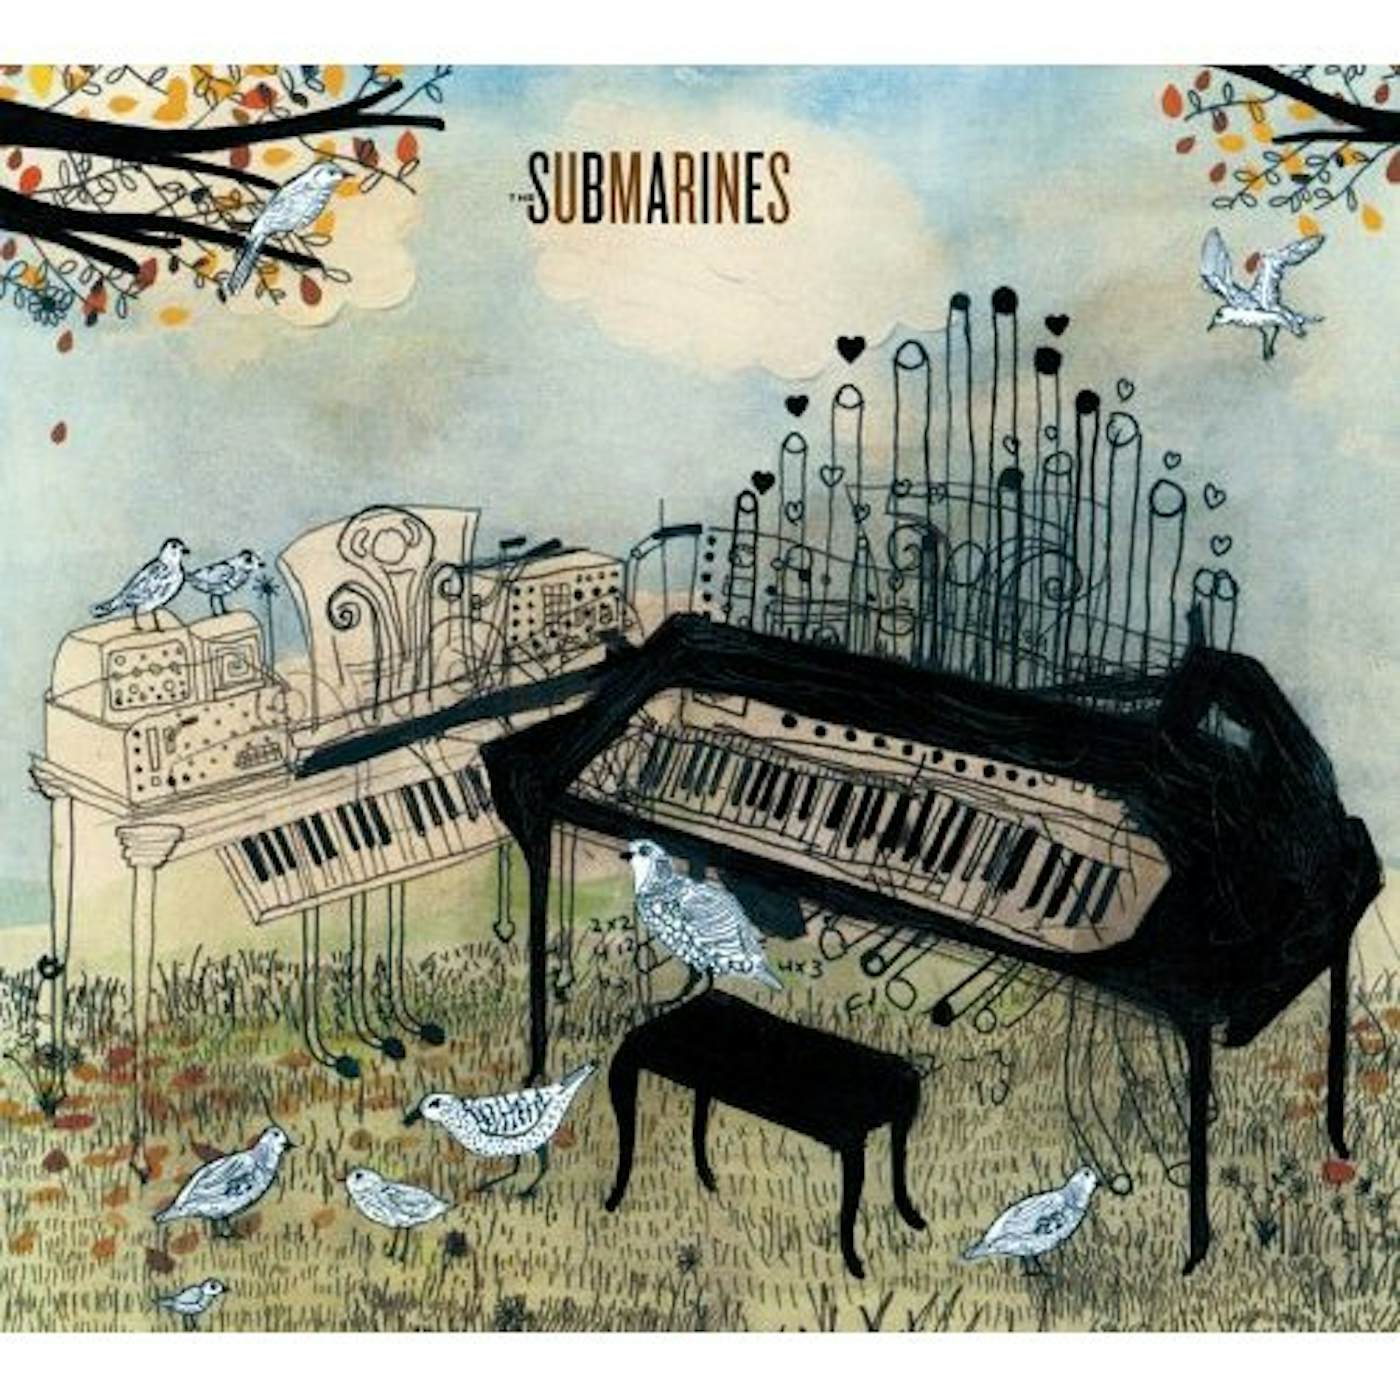 The Submarines DECLARE A NEW STATE CD